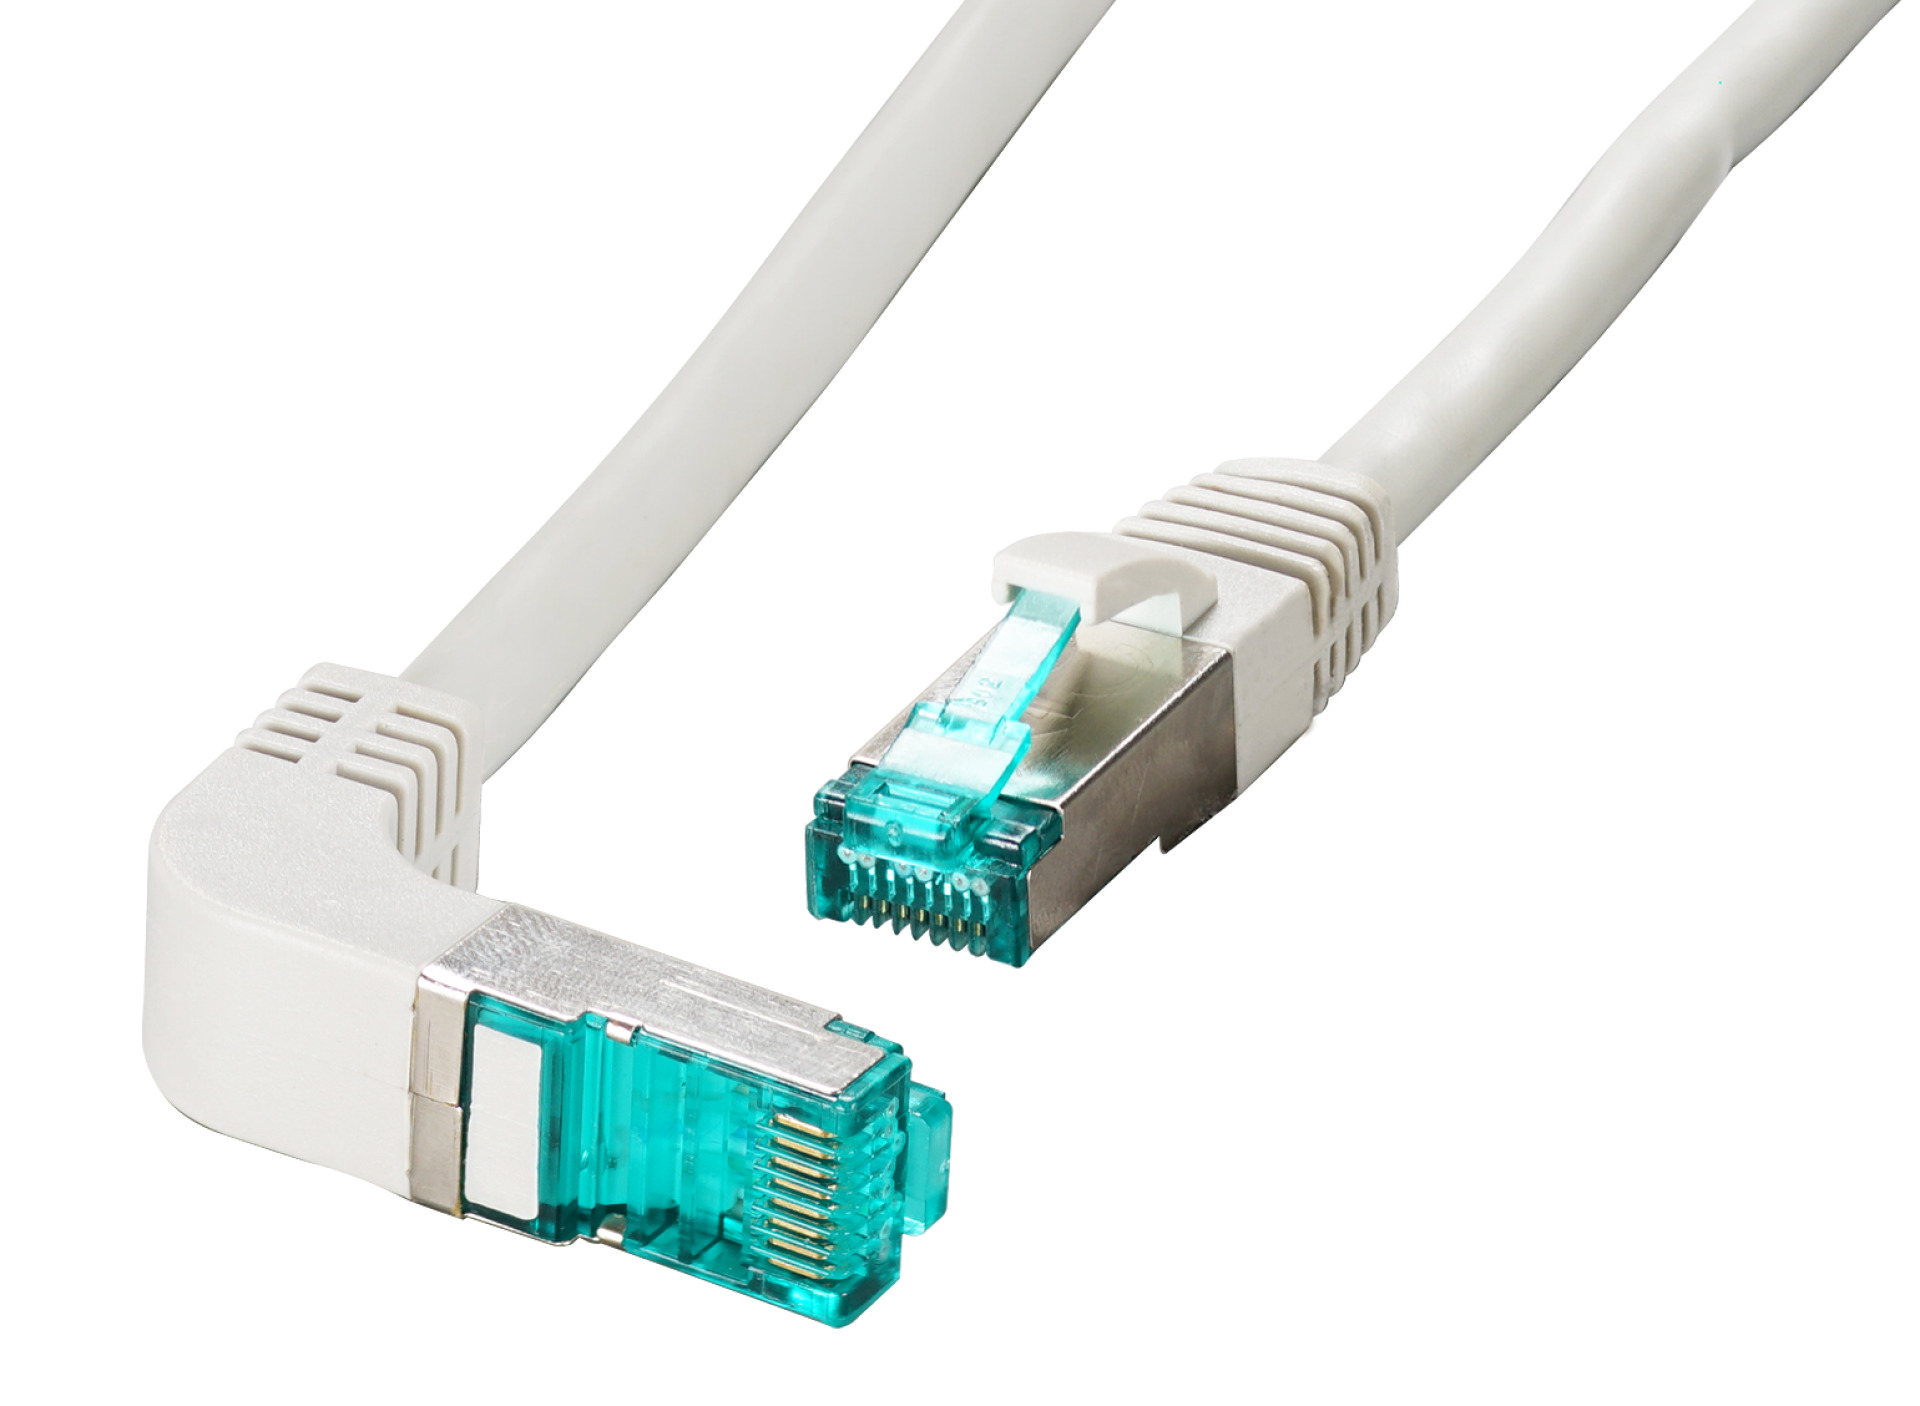 RJ45 Patch cable S/FTP, Cat.6A, LSZH, one side 90° angled, 2m, grey